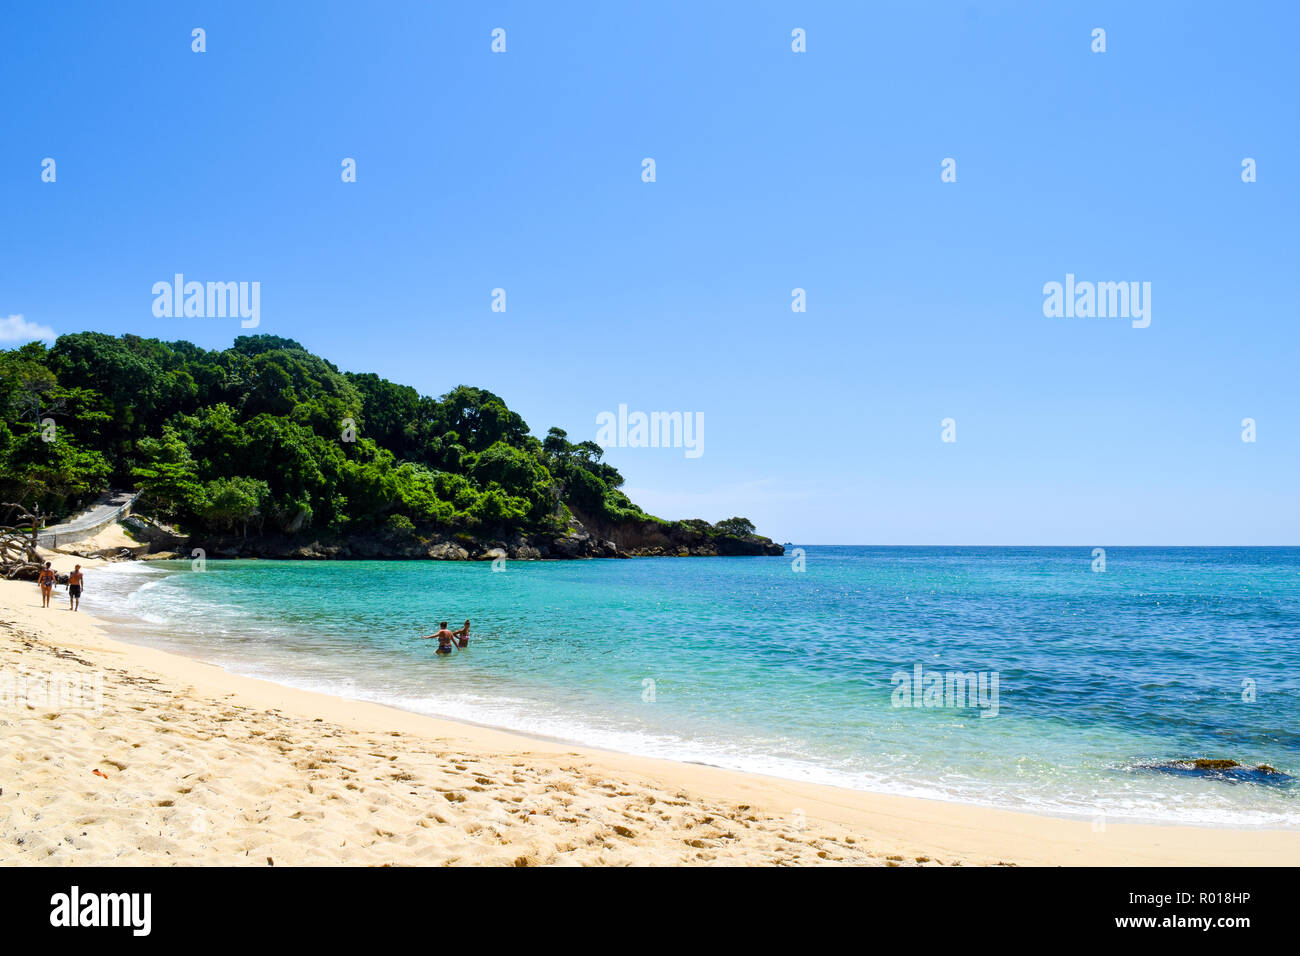 Paradise beach in caribbean sea, white beach, plams and turquoise ocean, some tourists at the beach in the dominican republic Stock Photo